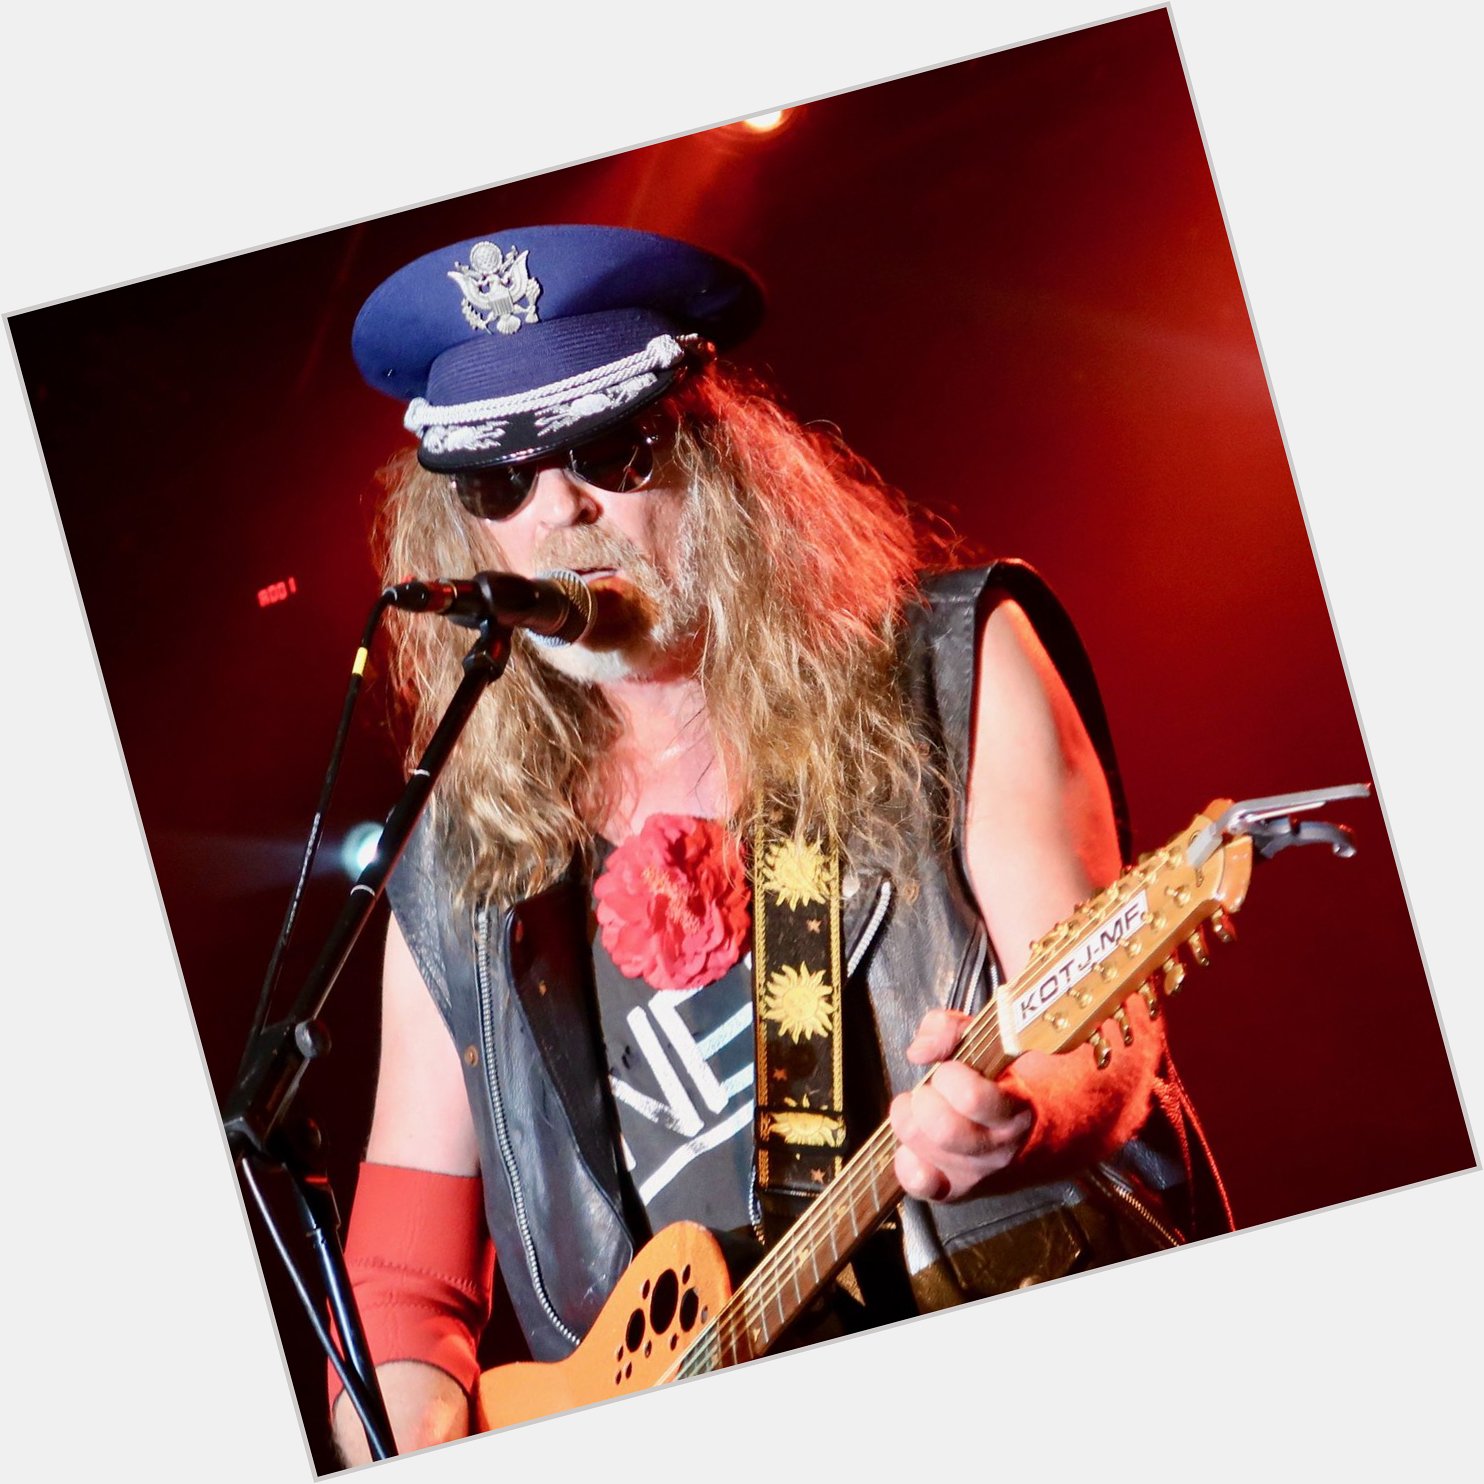 Happy birthday to the one and only Julian Cope. Photos taken in Birmingham in 2018 